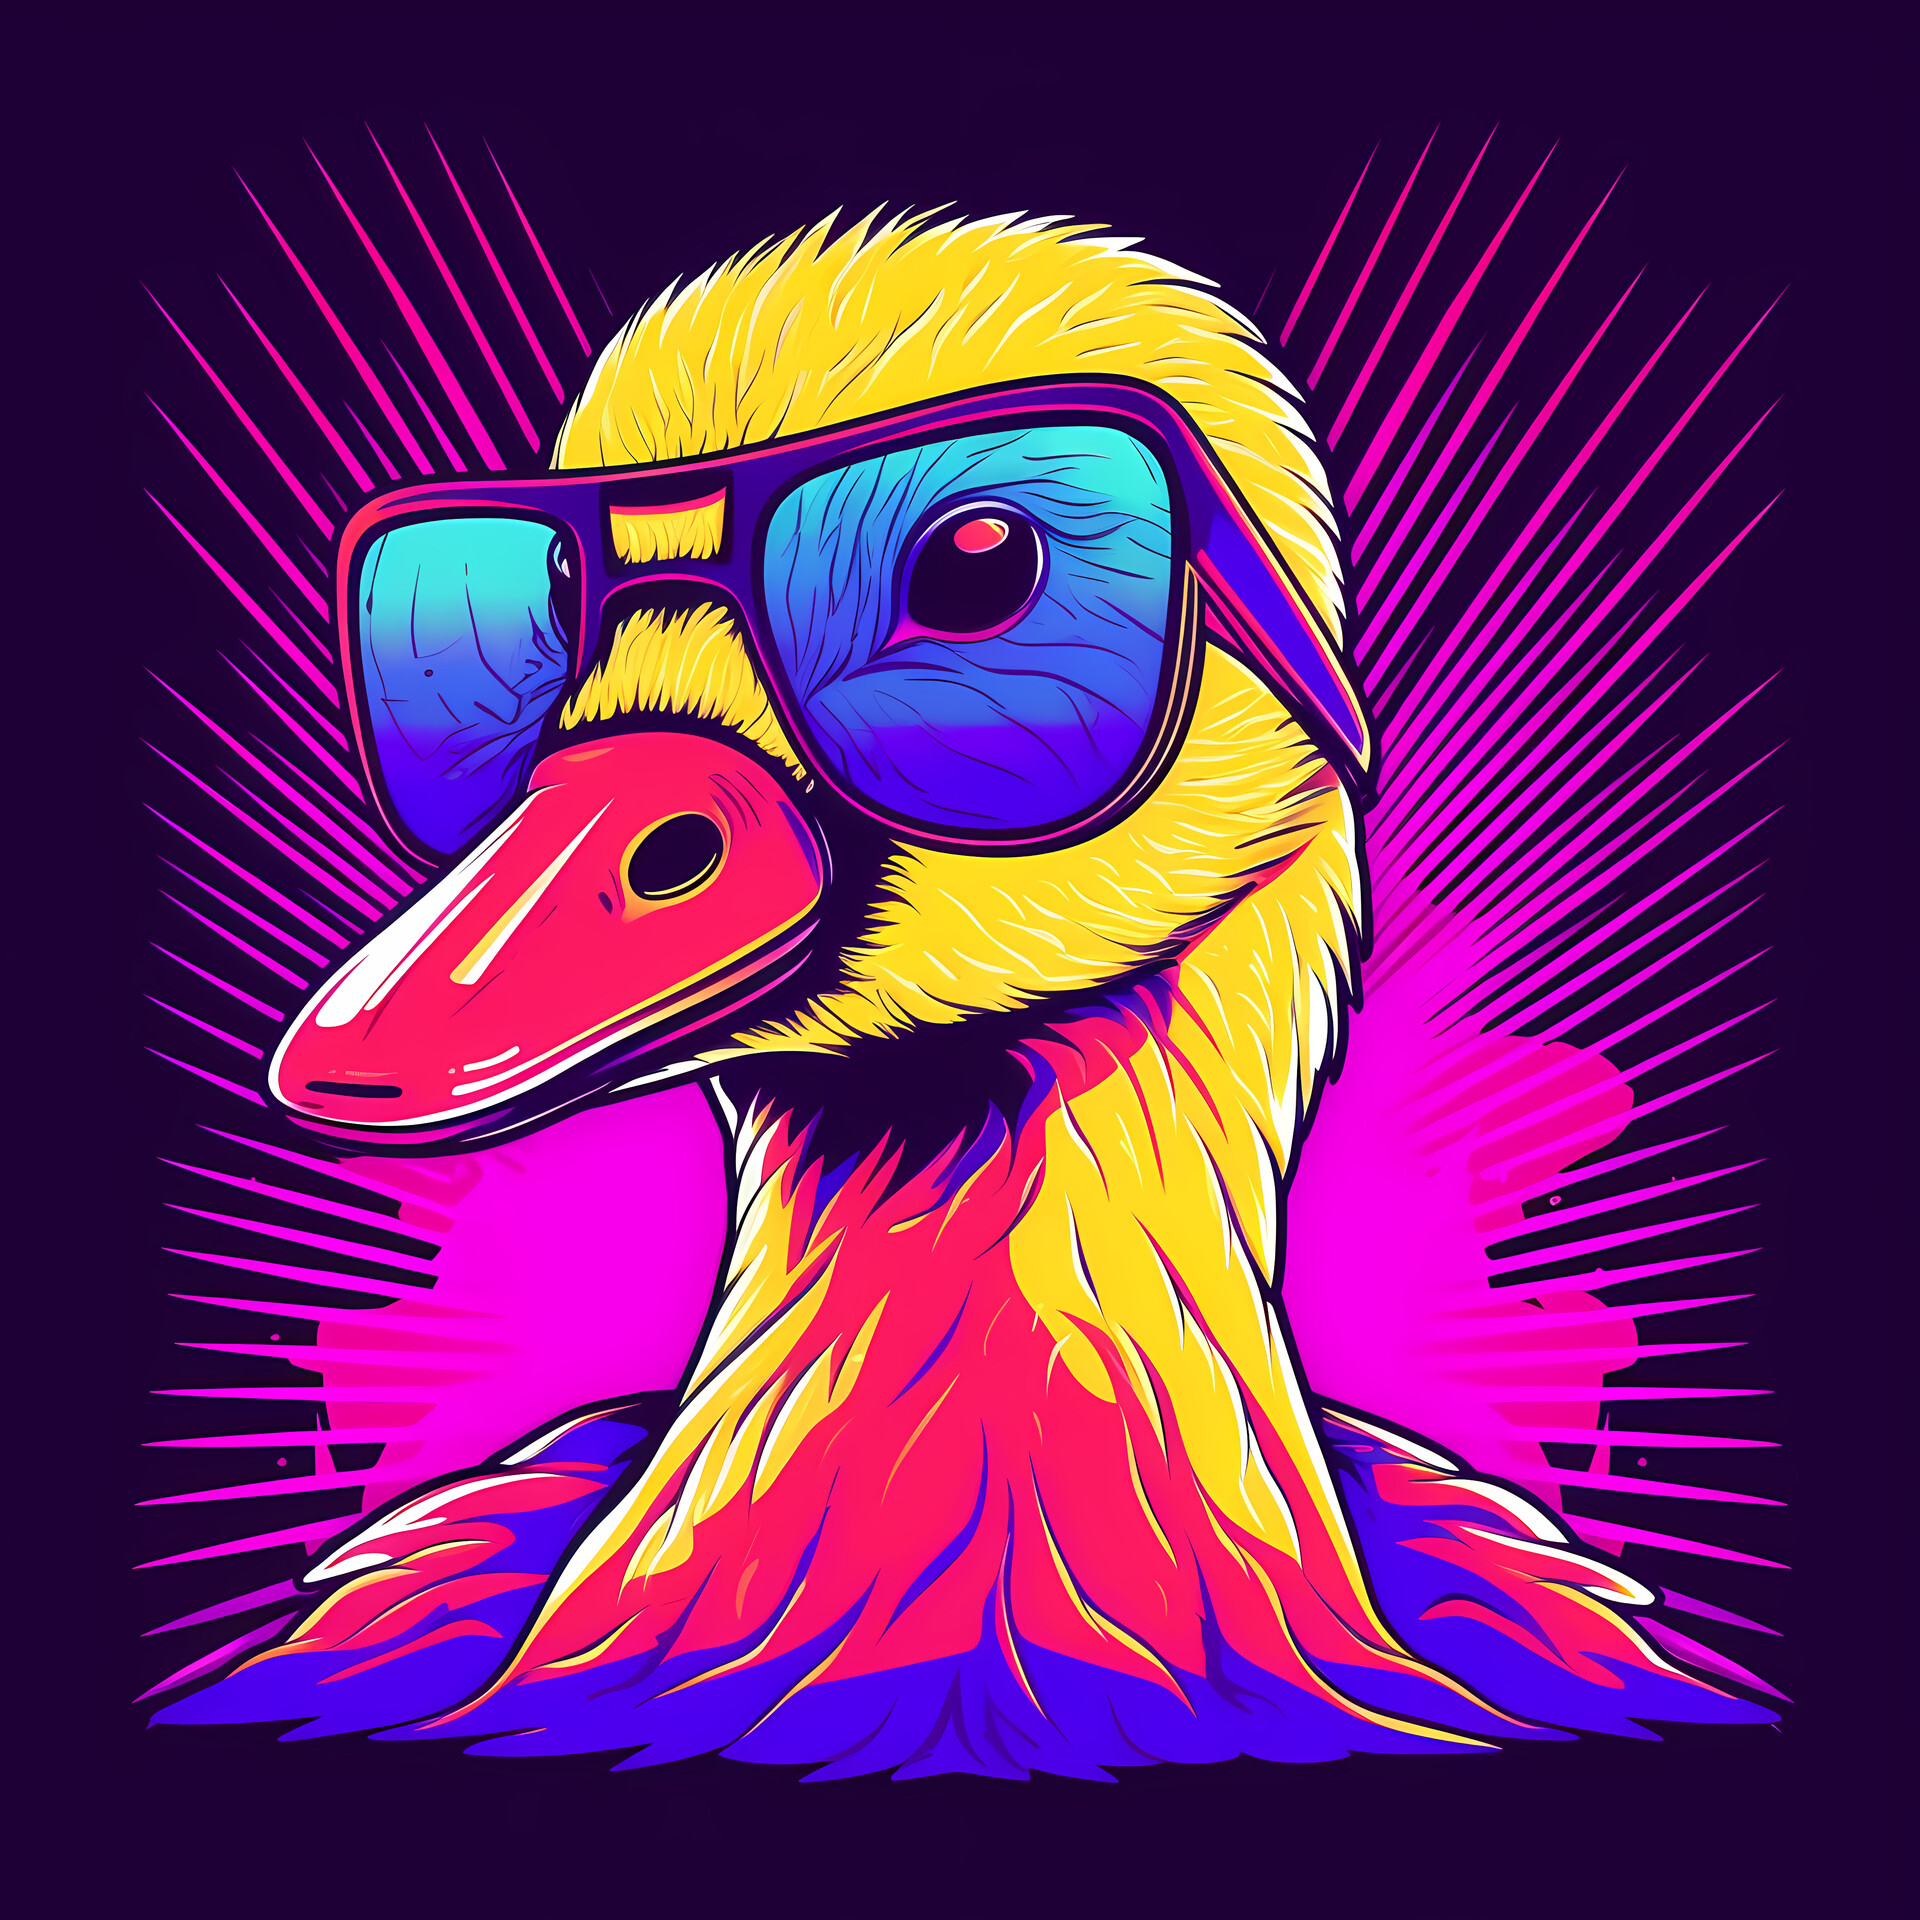 Rubber yellow duck in sunglasses icon isolated Vector Image